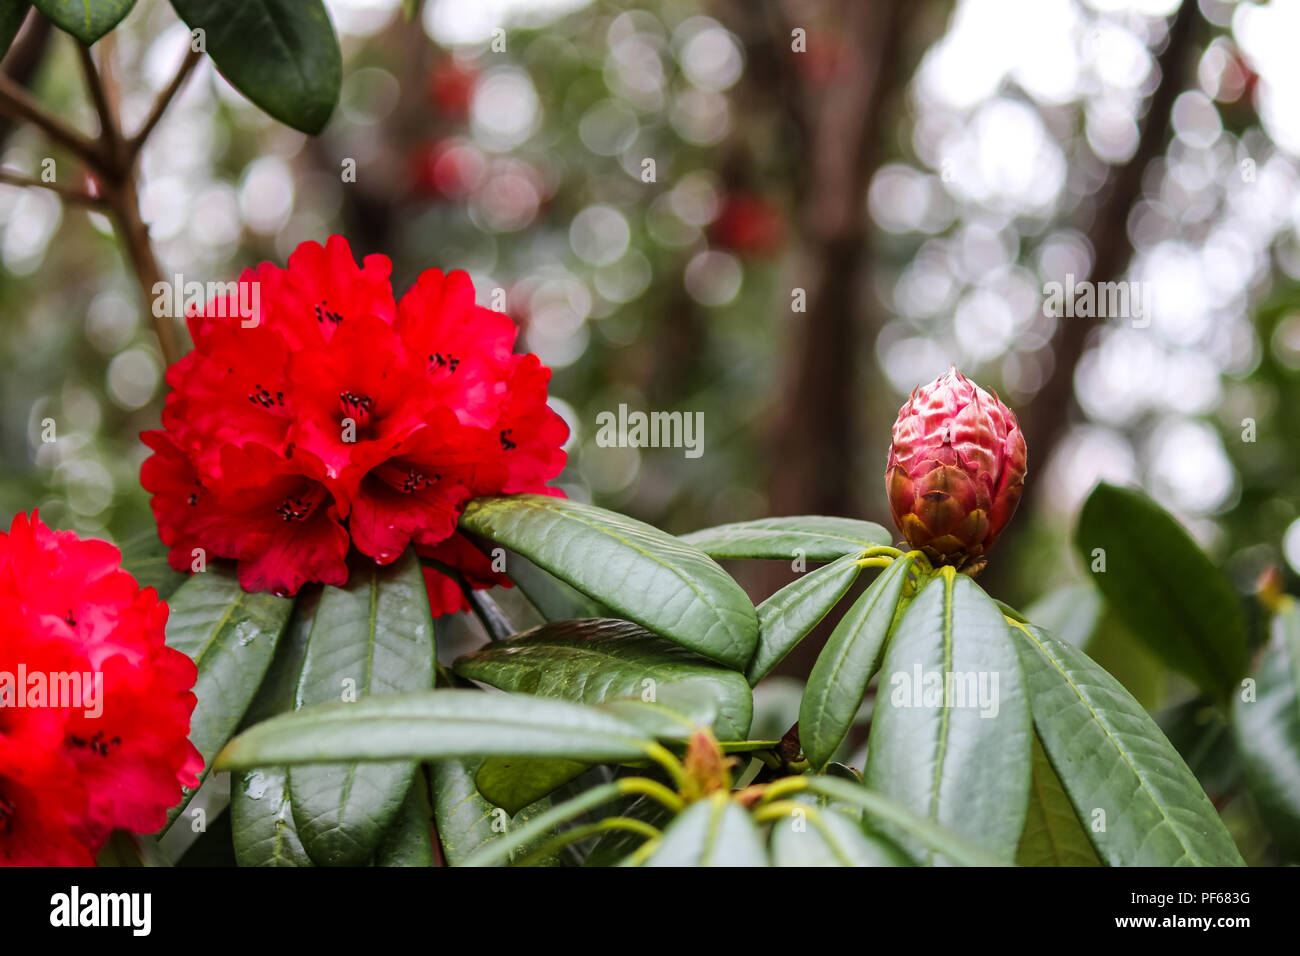 Open red flower and closed flower side by side Stock Photo